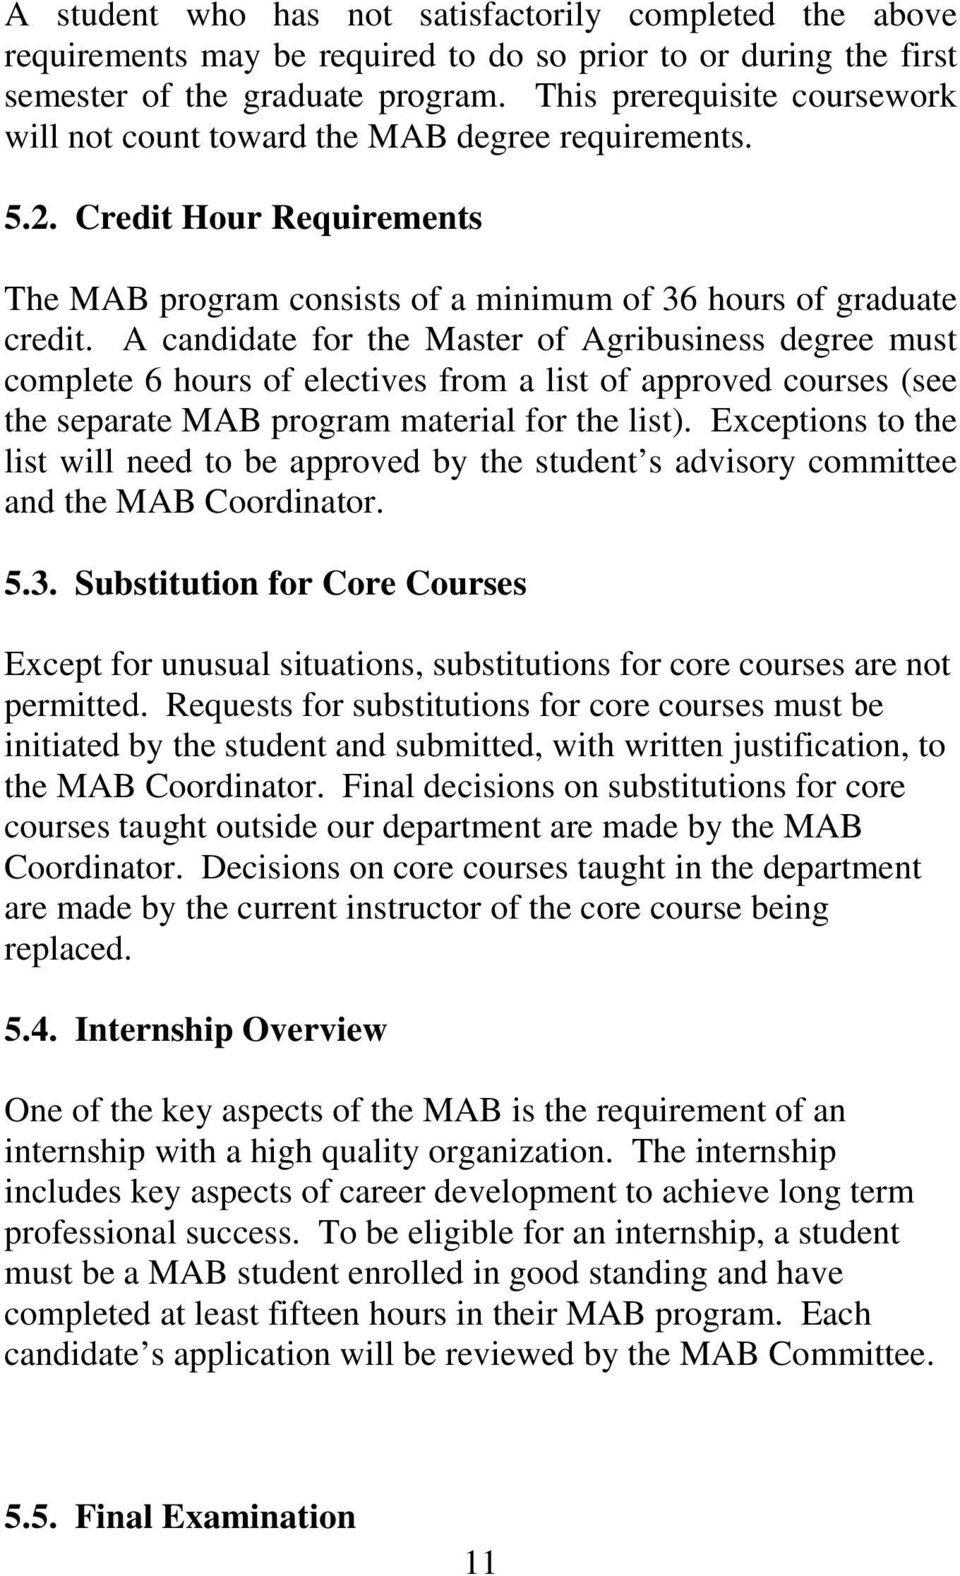 A candidate for the Master of Agribusiness degree must complete 6 hours of electives from a list of approved courses (see the separate MAB program material for the list).